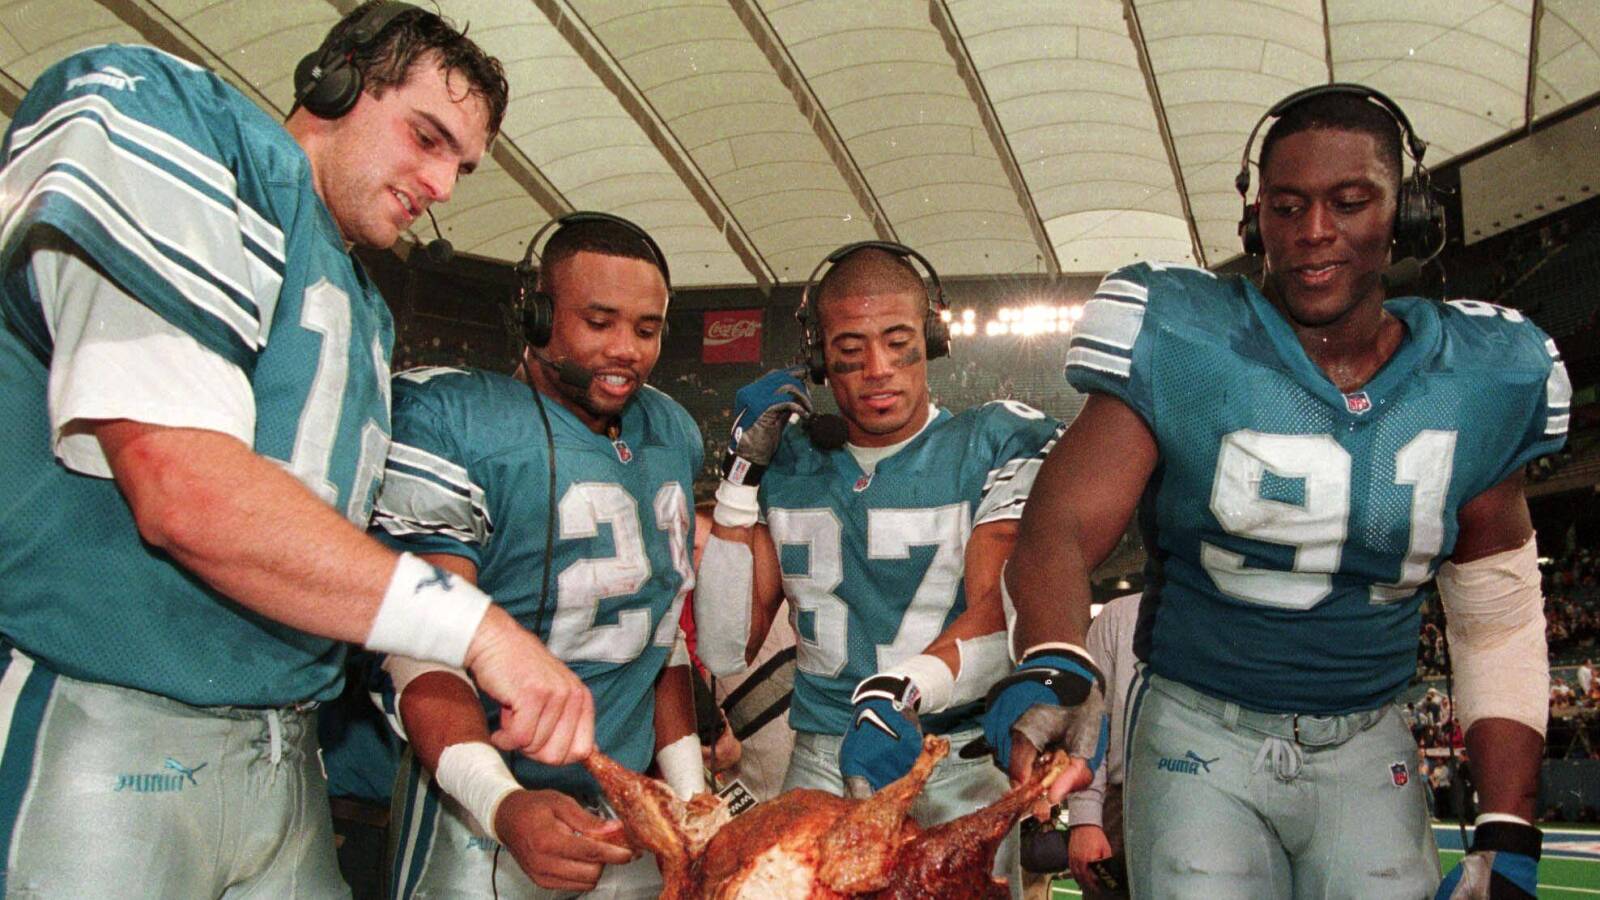 The best individual NFL performances on Thanksgiving Day